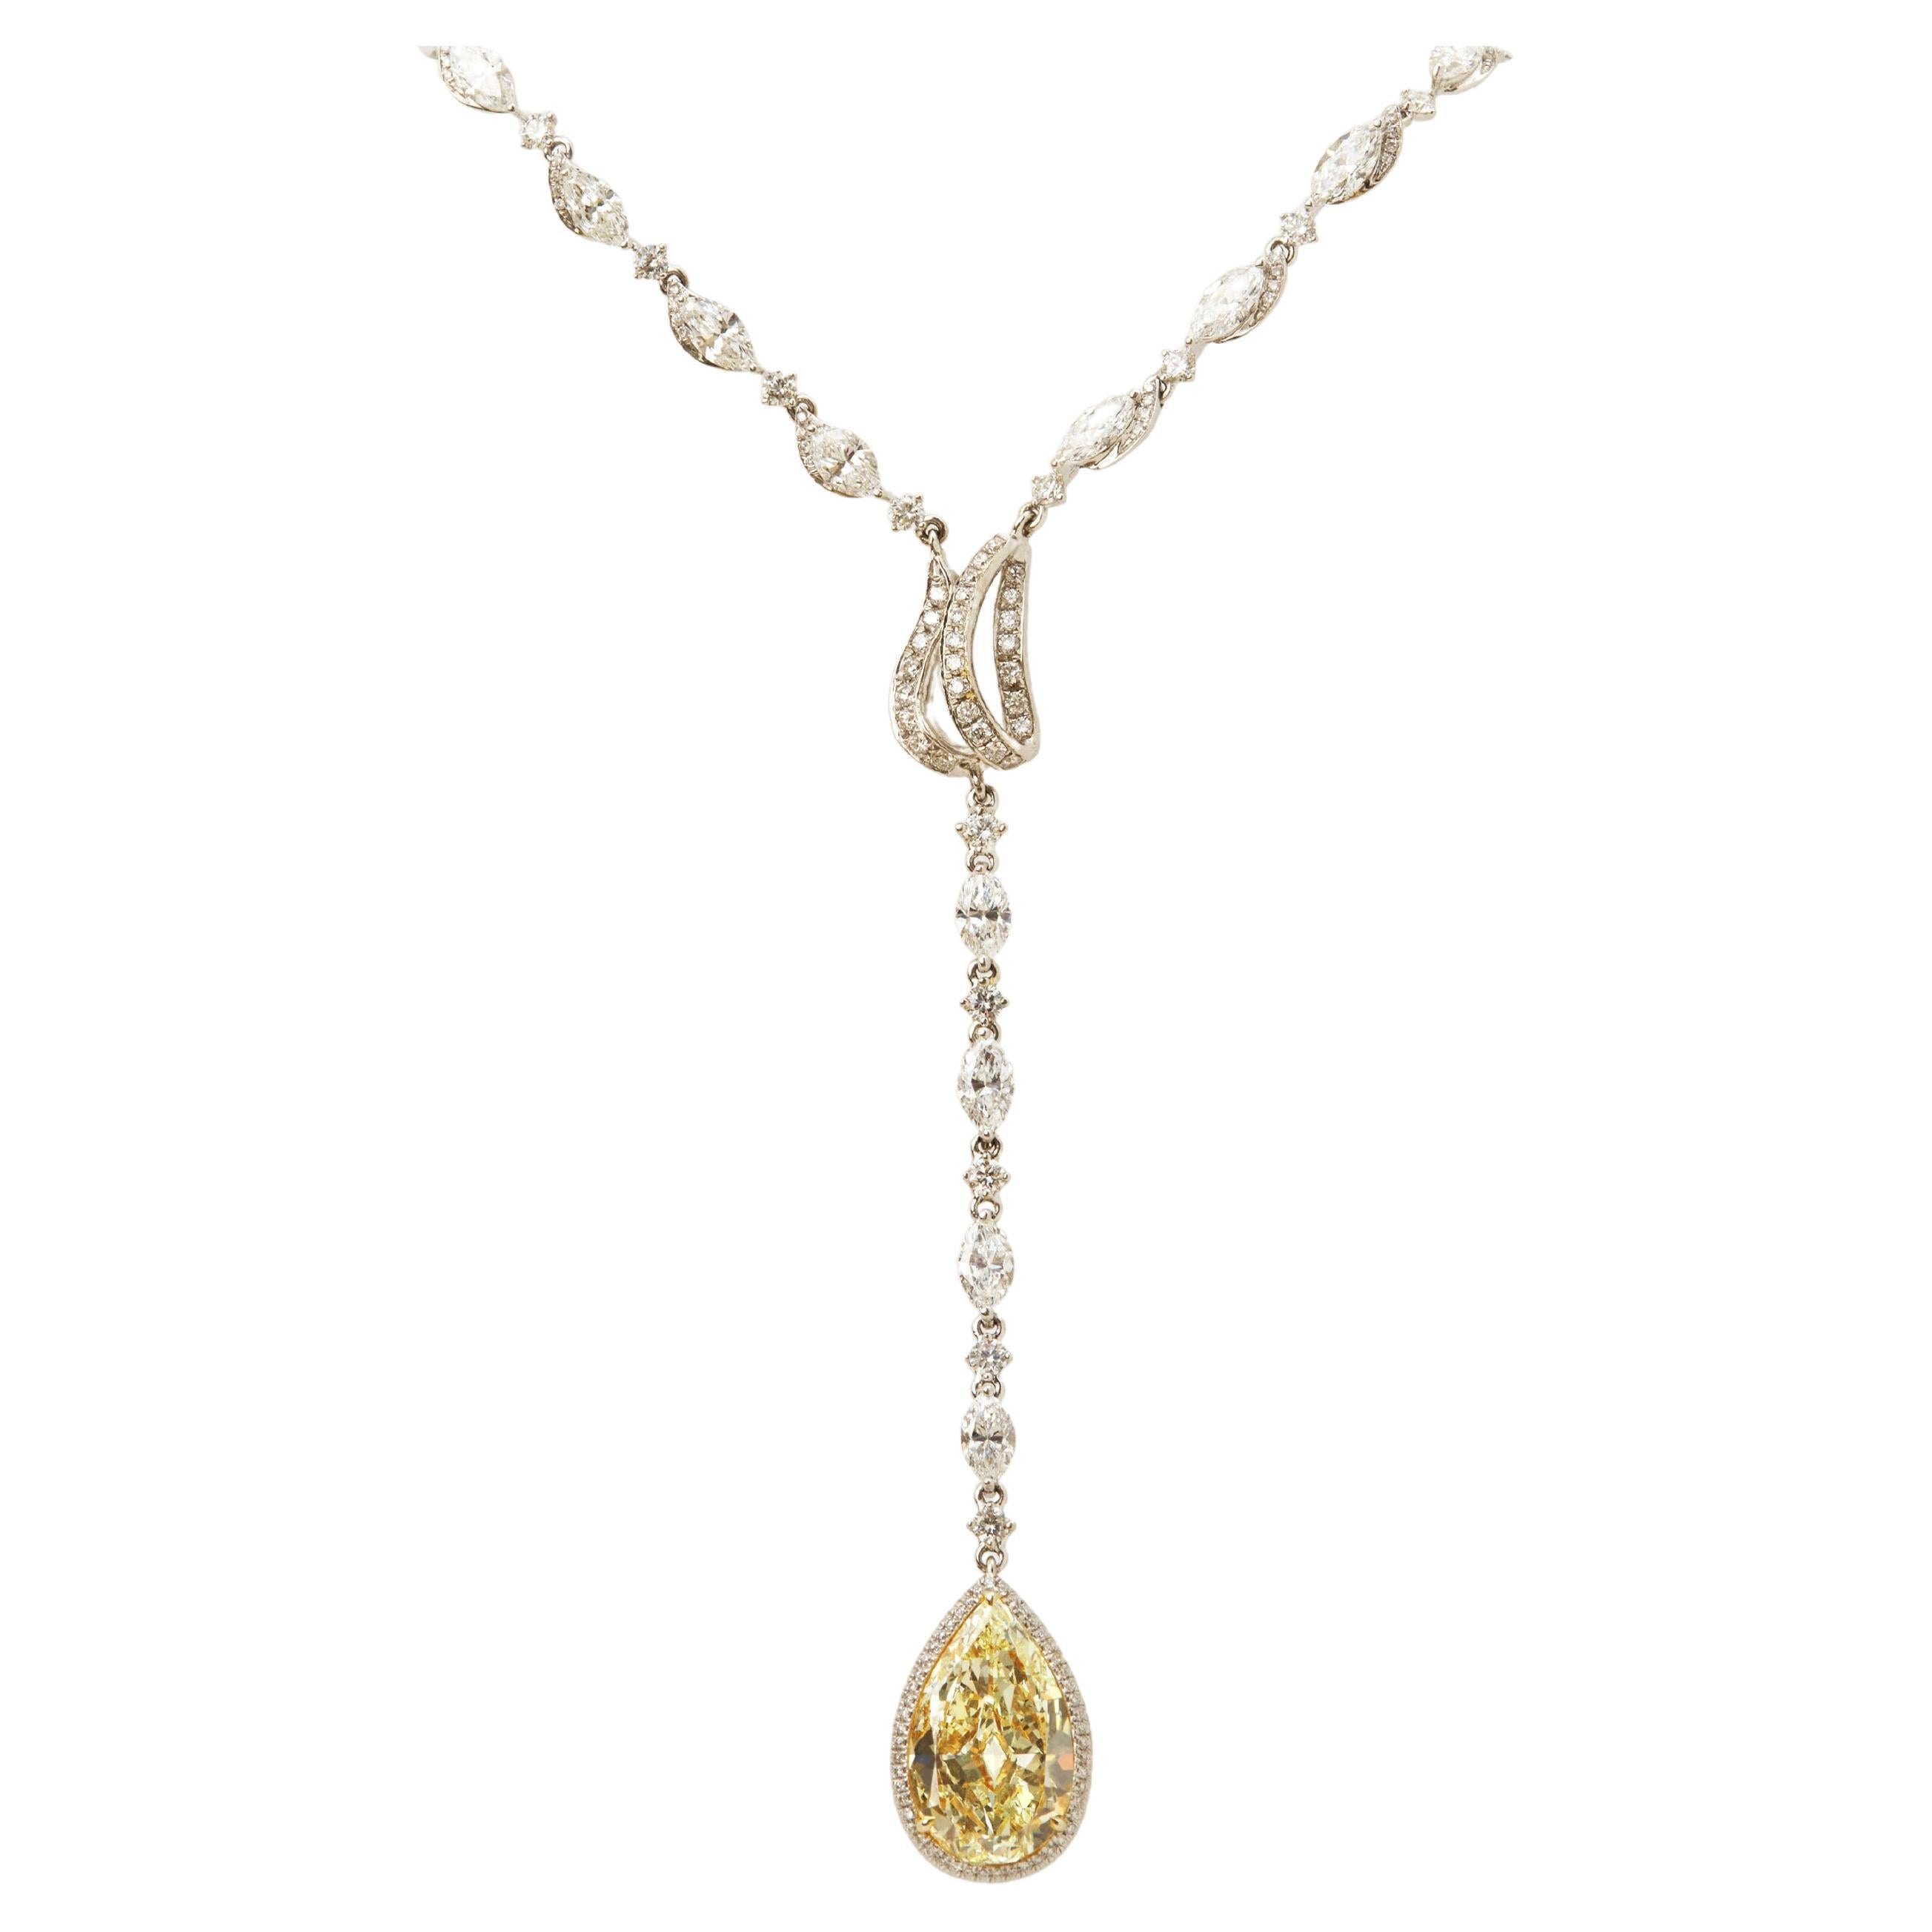 12 Carat Yellow and White Diamond Station Drop Necklace 18K Gold